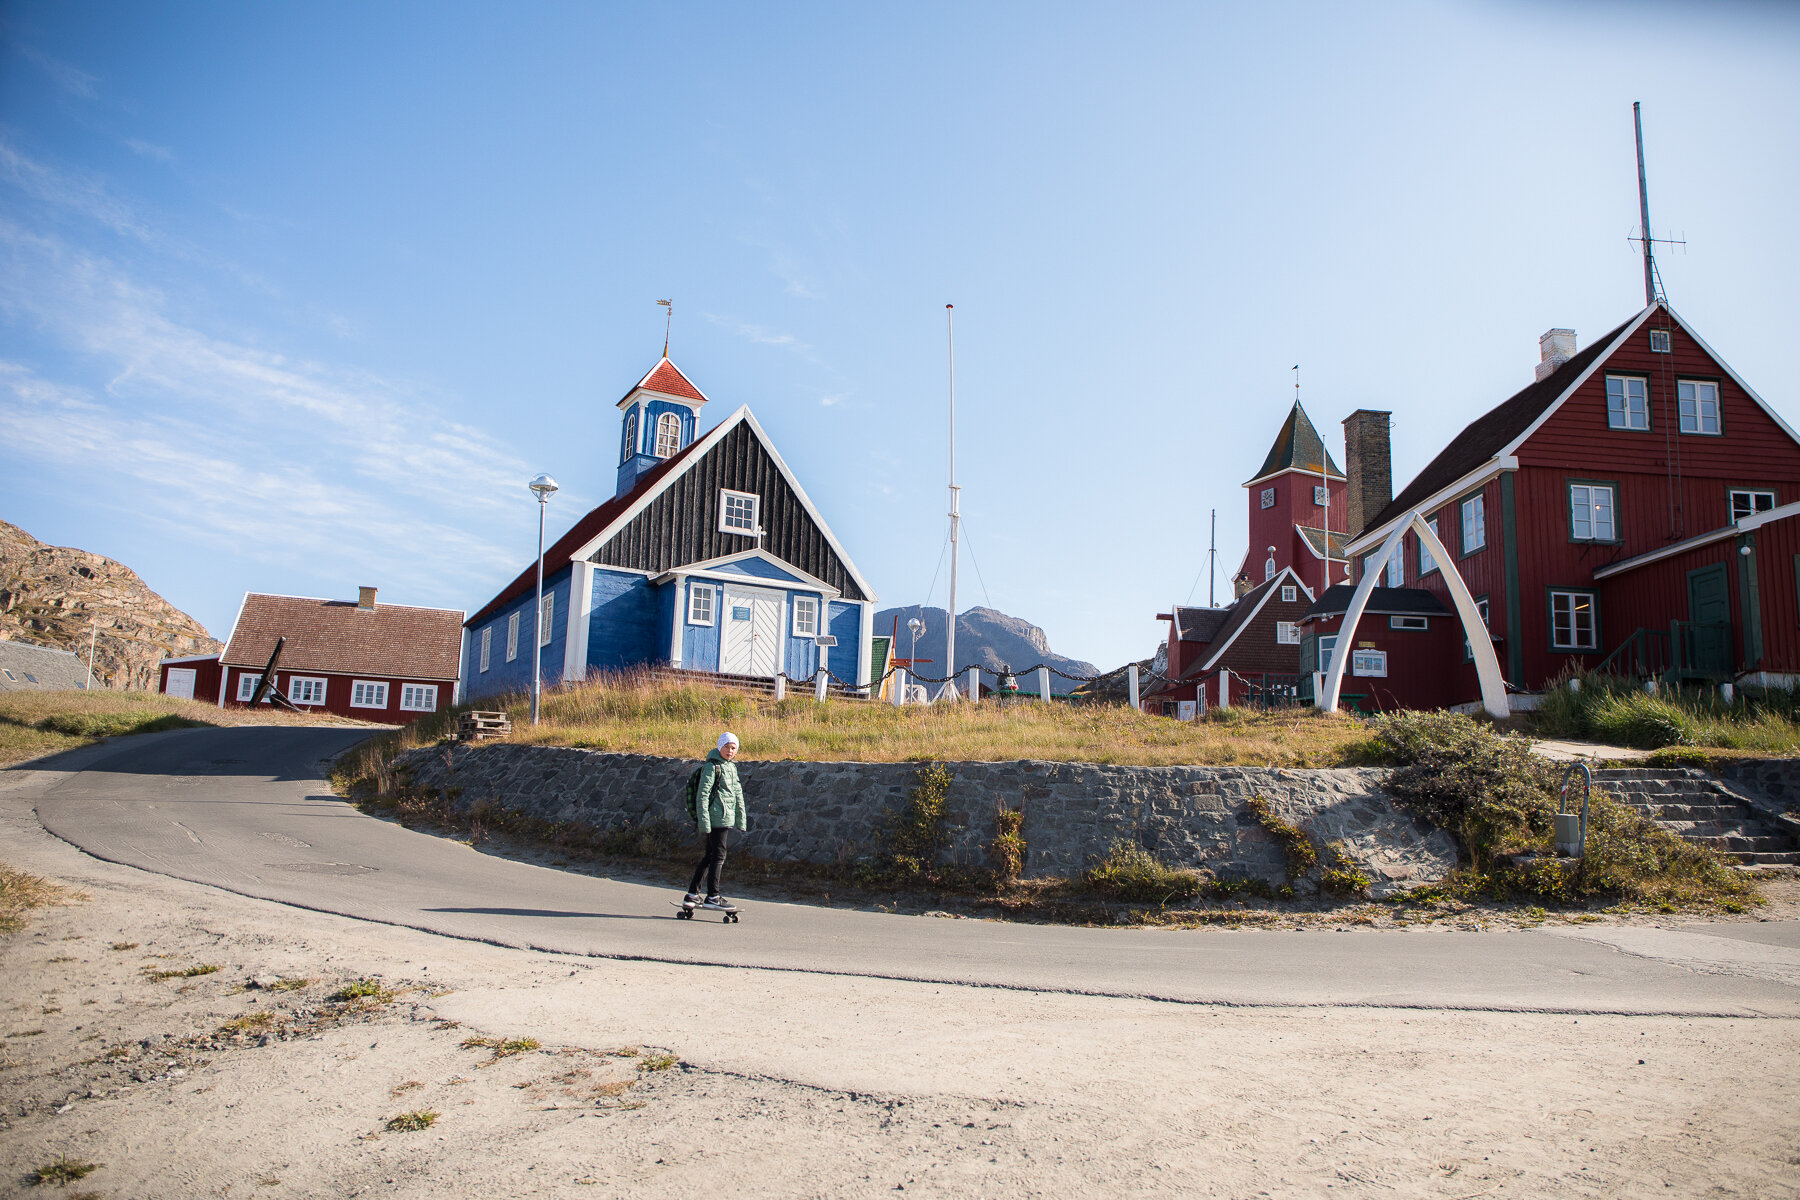  Greenland - Sisimiut- A young boy skateboards through town 